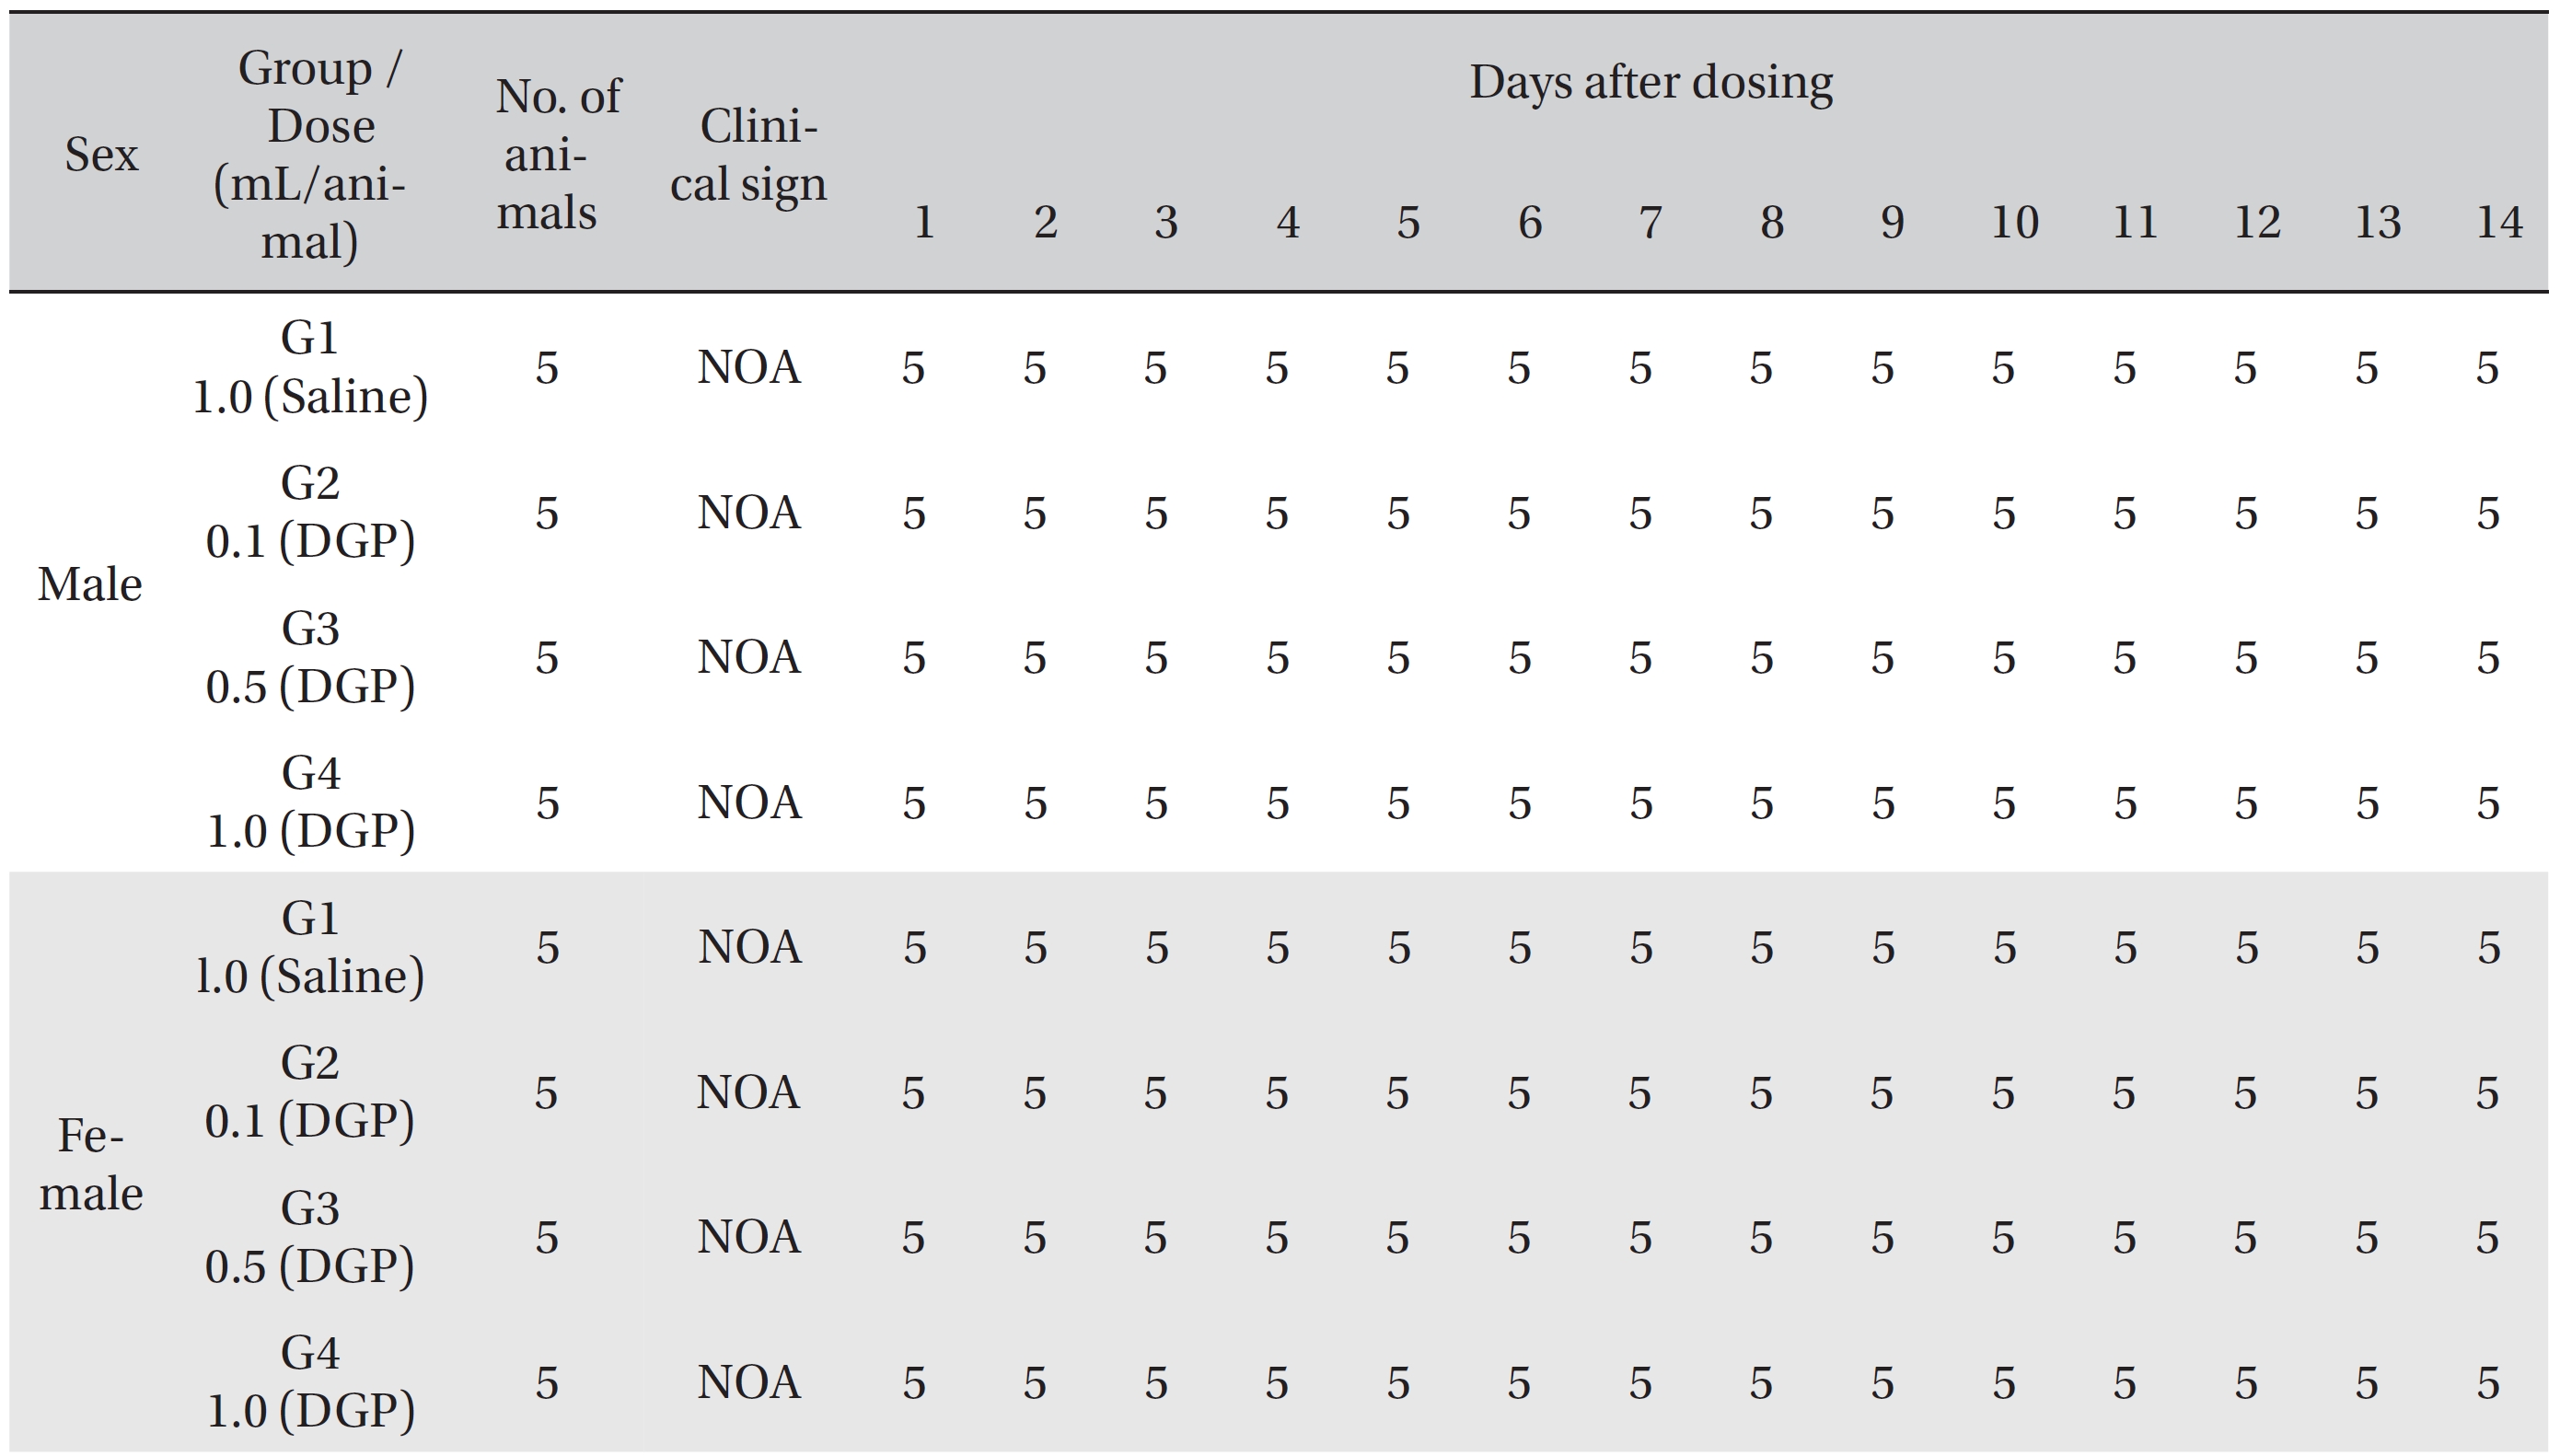 Summary of clinical signs by day after dosing